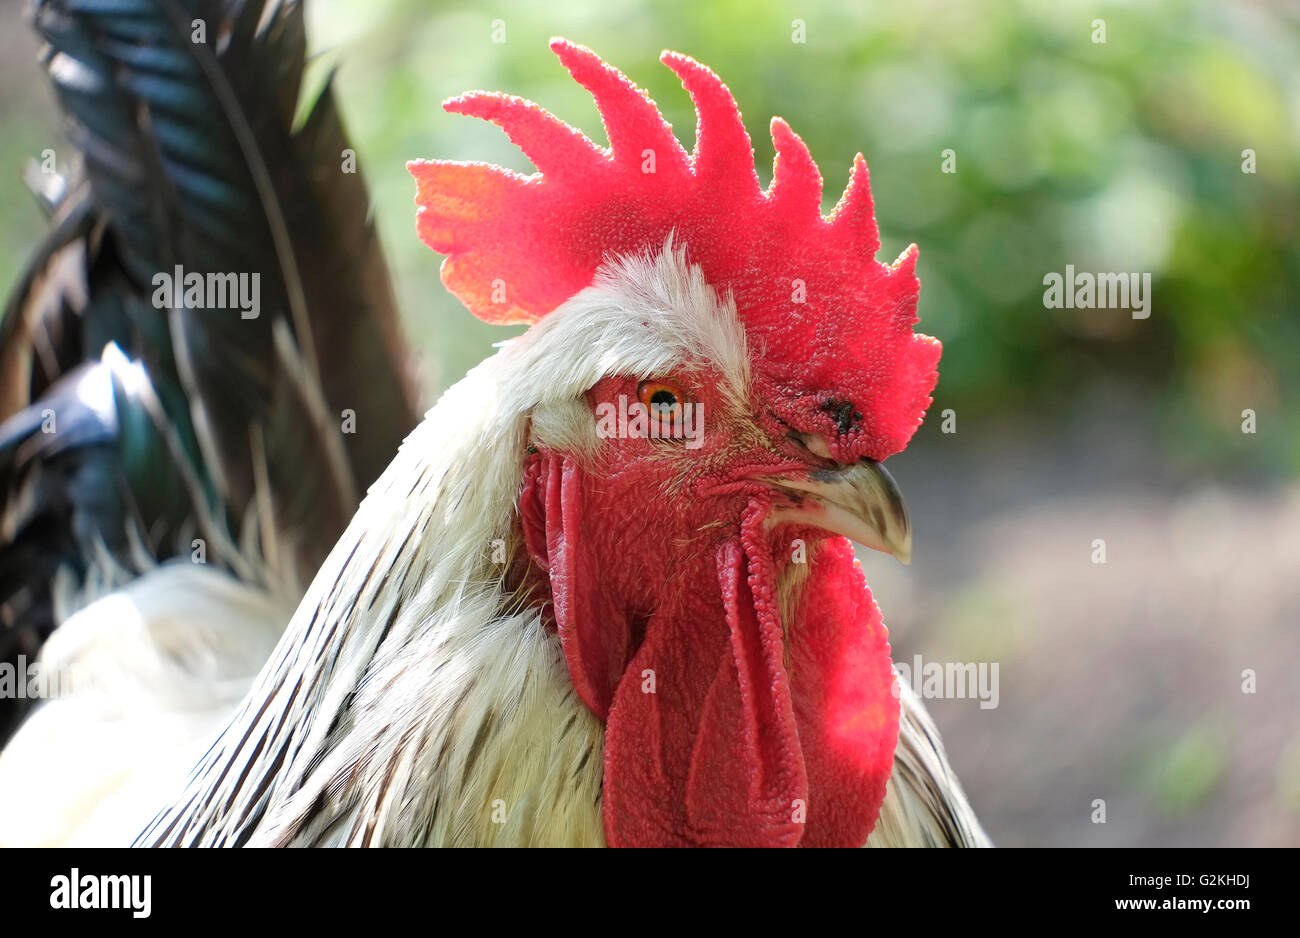 cockerel with red comb and wattles, norfolk, england Stock Photo